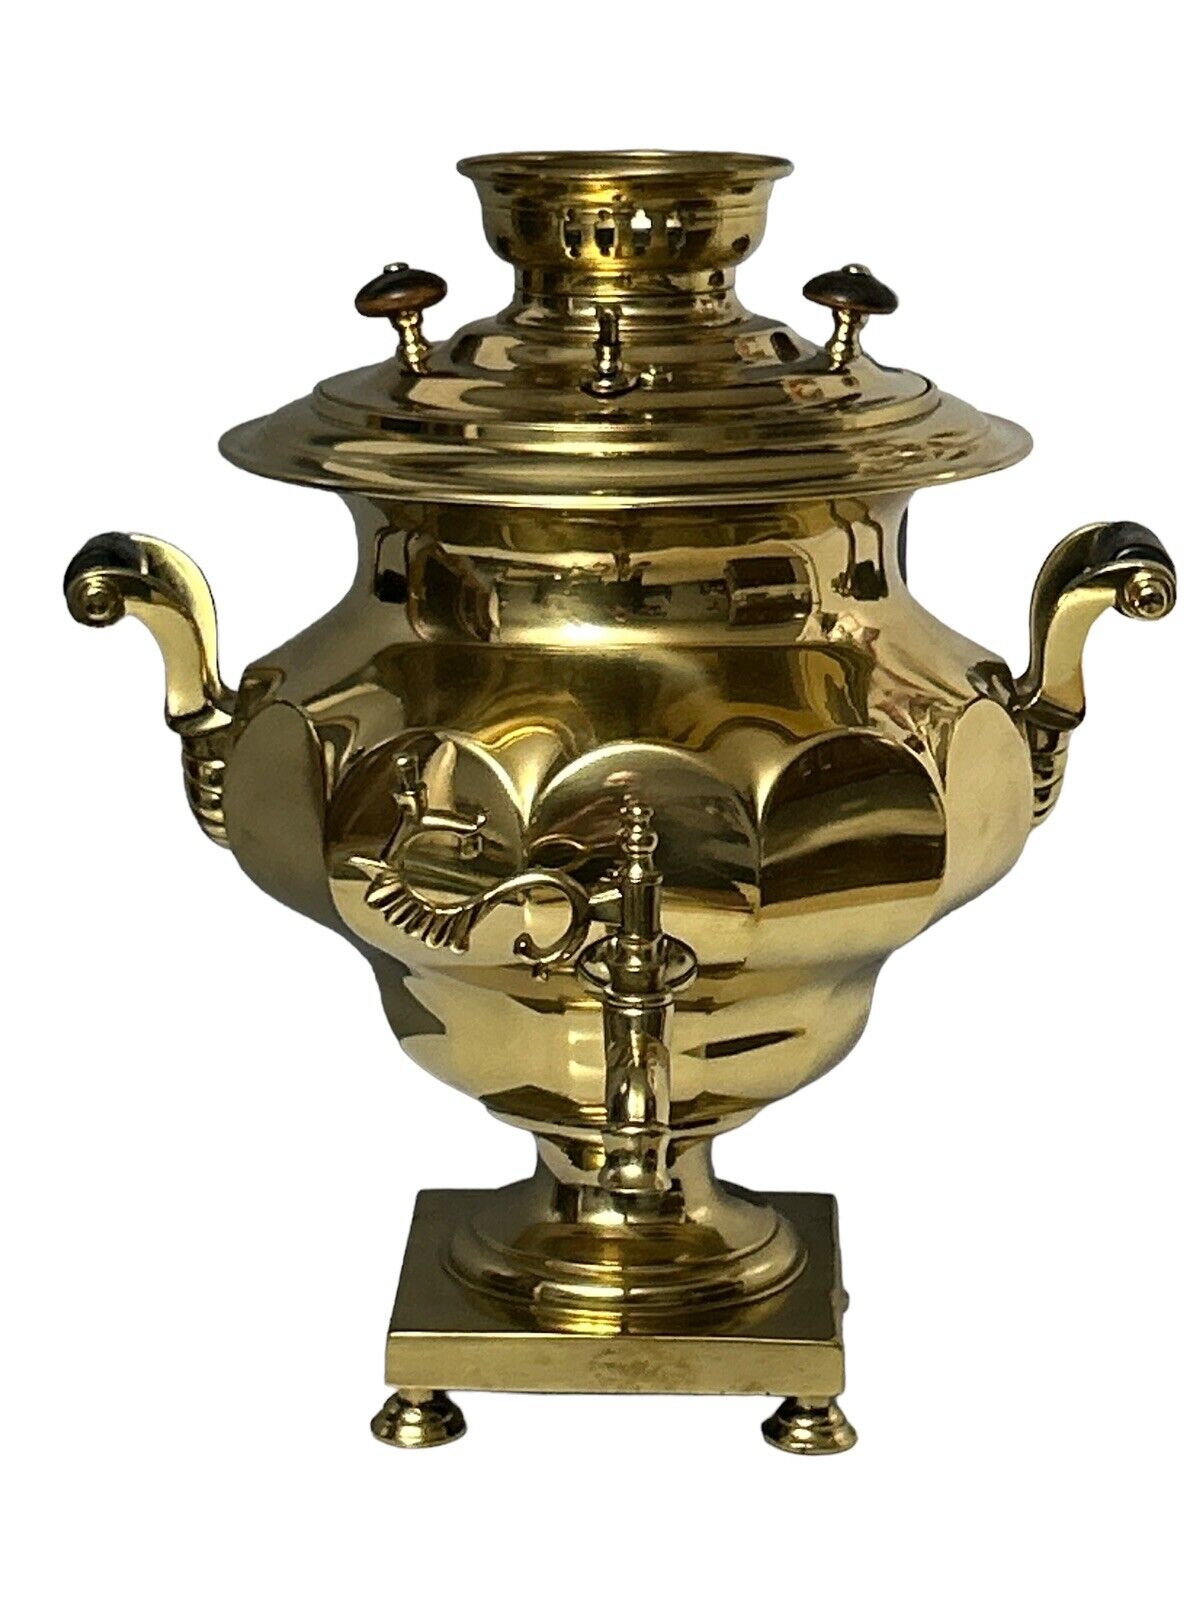 Antique Imperial Russian Polished Brass Samovar Stamped Excellent Condition